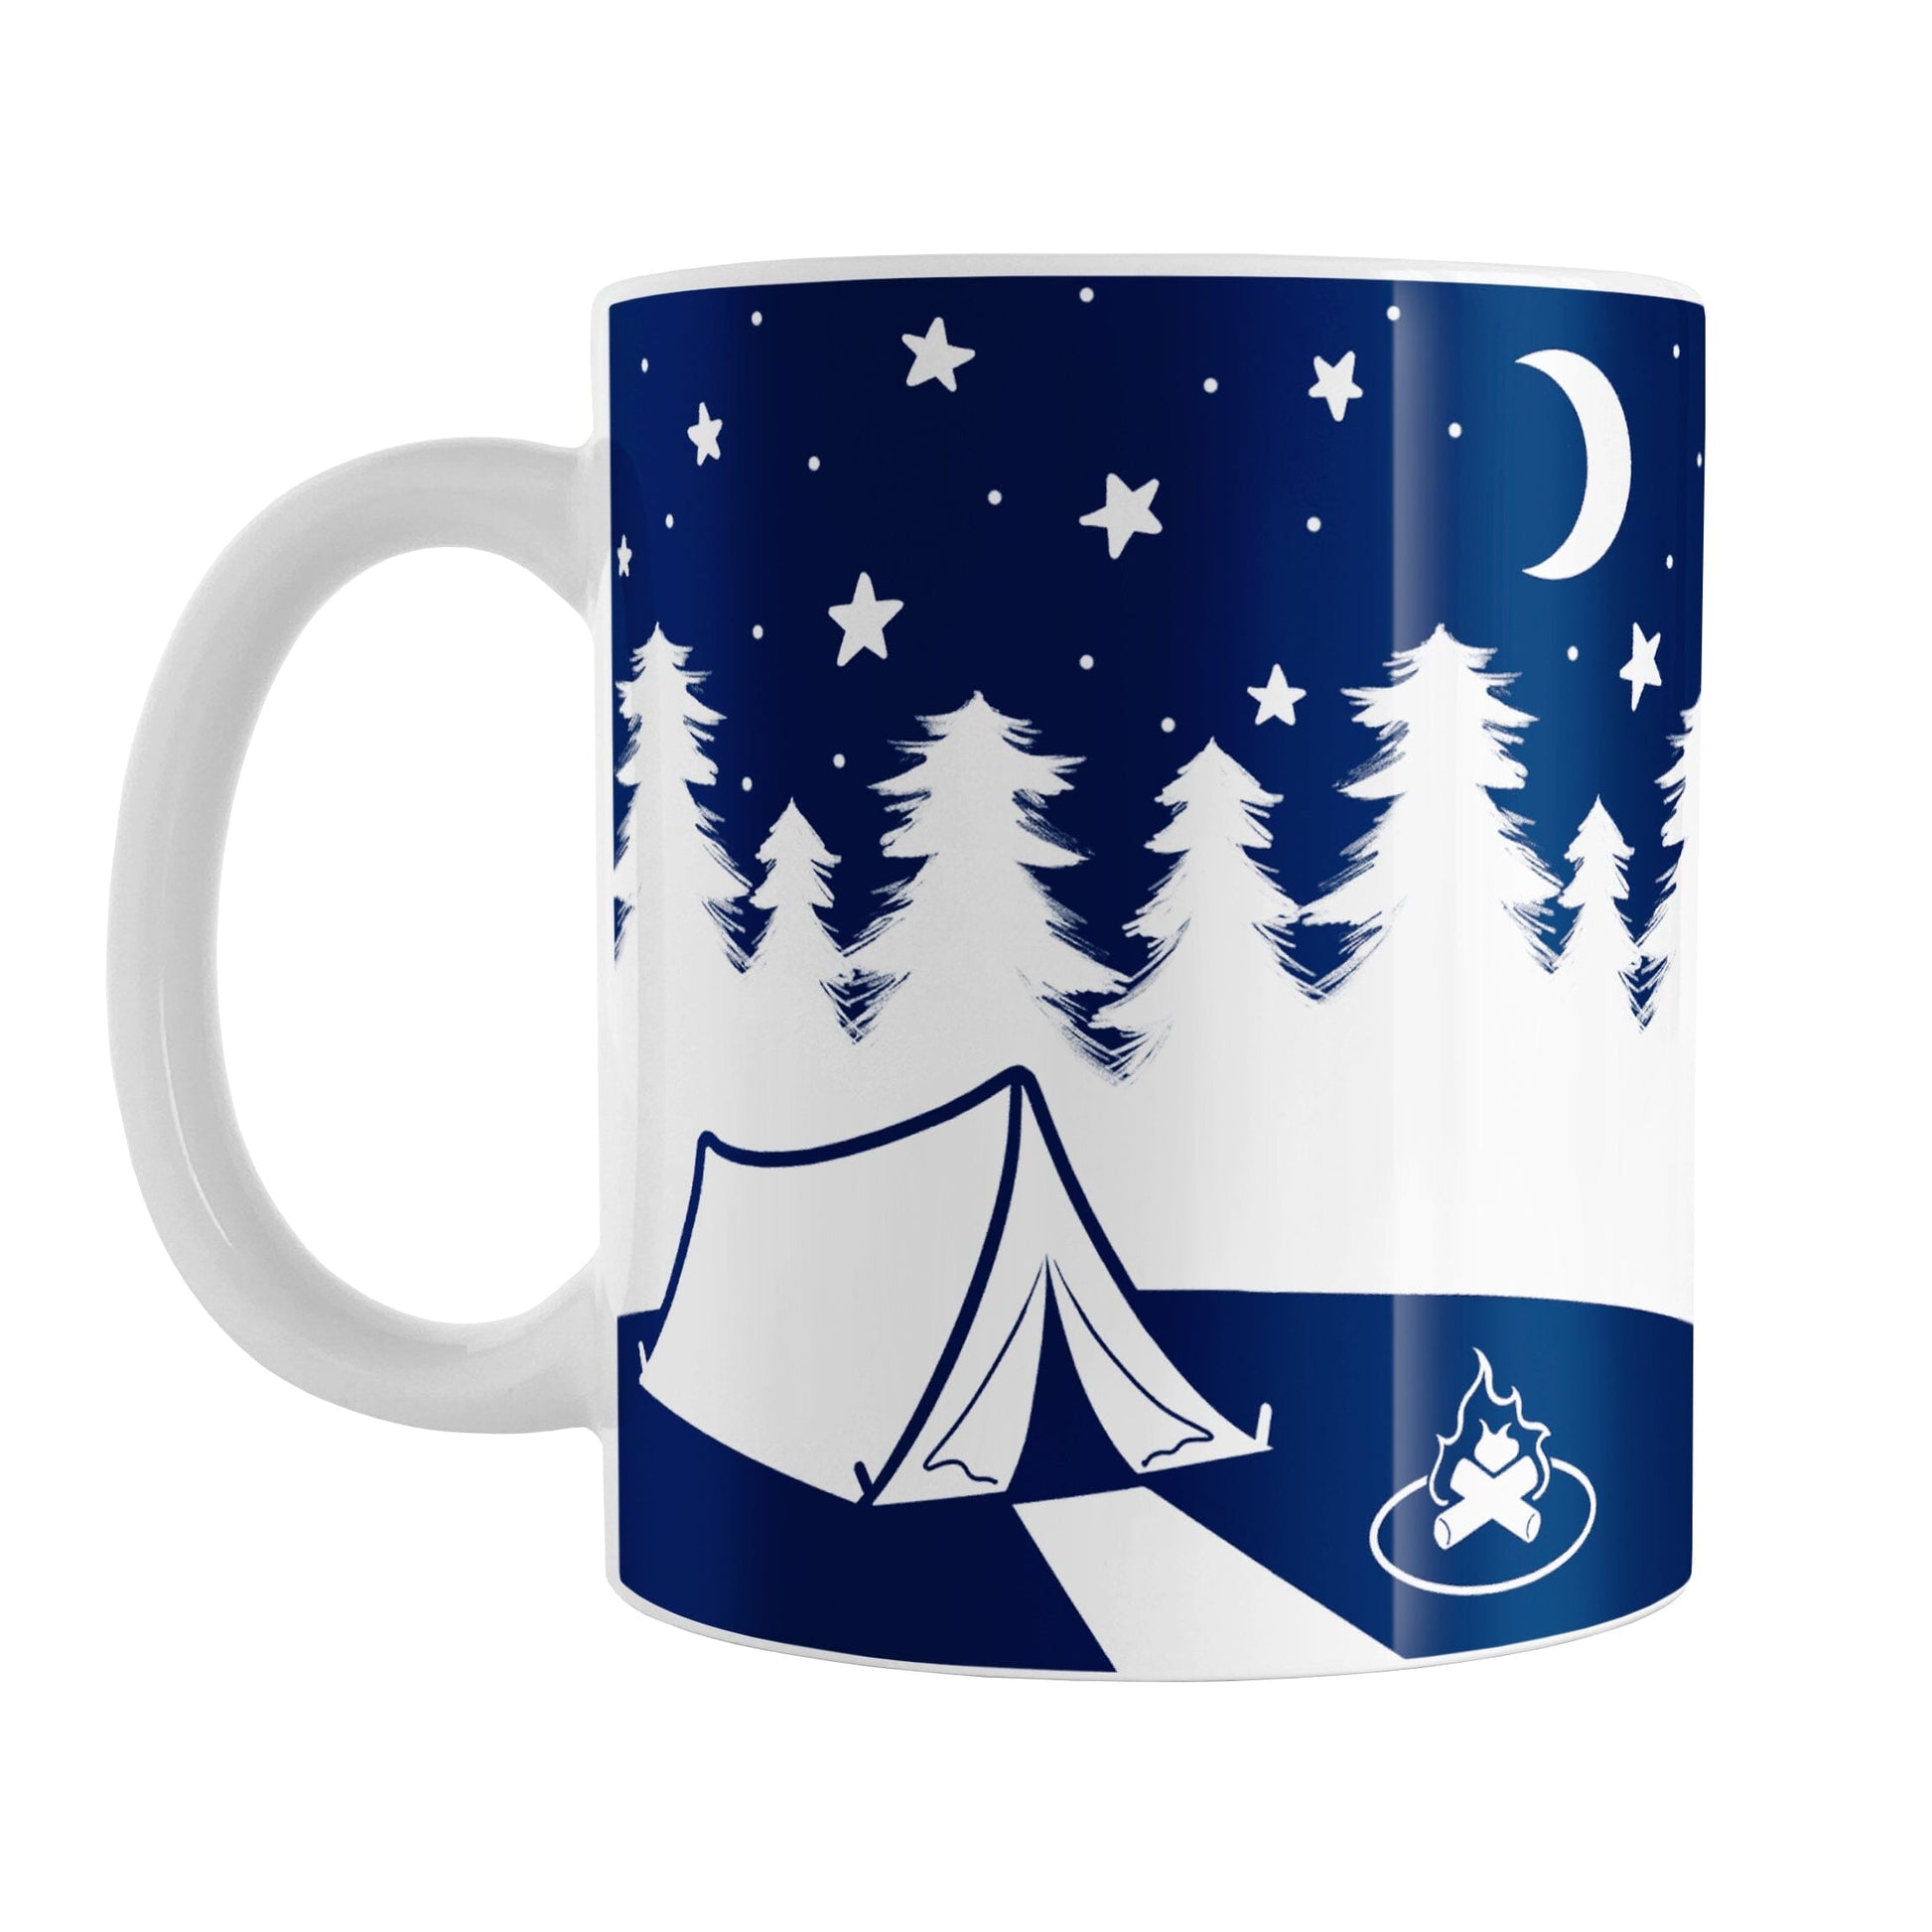 Night Sky Camping Mug (11oz) at Amy's Coffee Mugs. A ceramic coffee mug designed with a blue and white illustration of a camping tent on a hill with a campfire, white trees behind the hill, and a sky filled with whimsical hand-drawn stars and a moon.